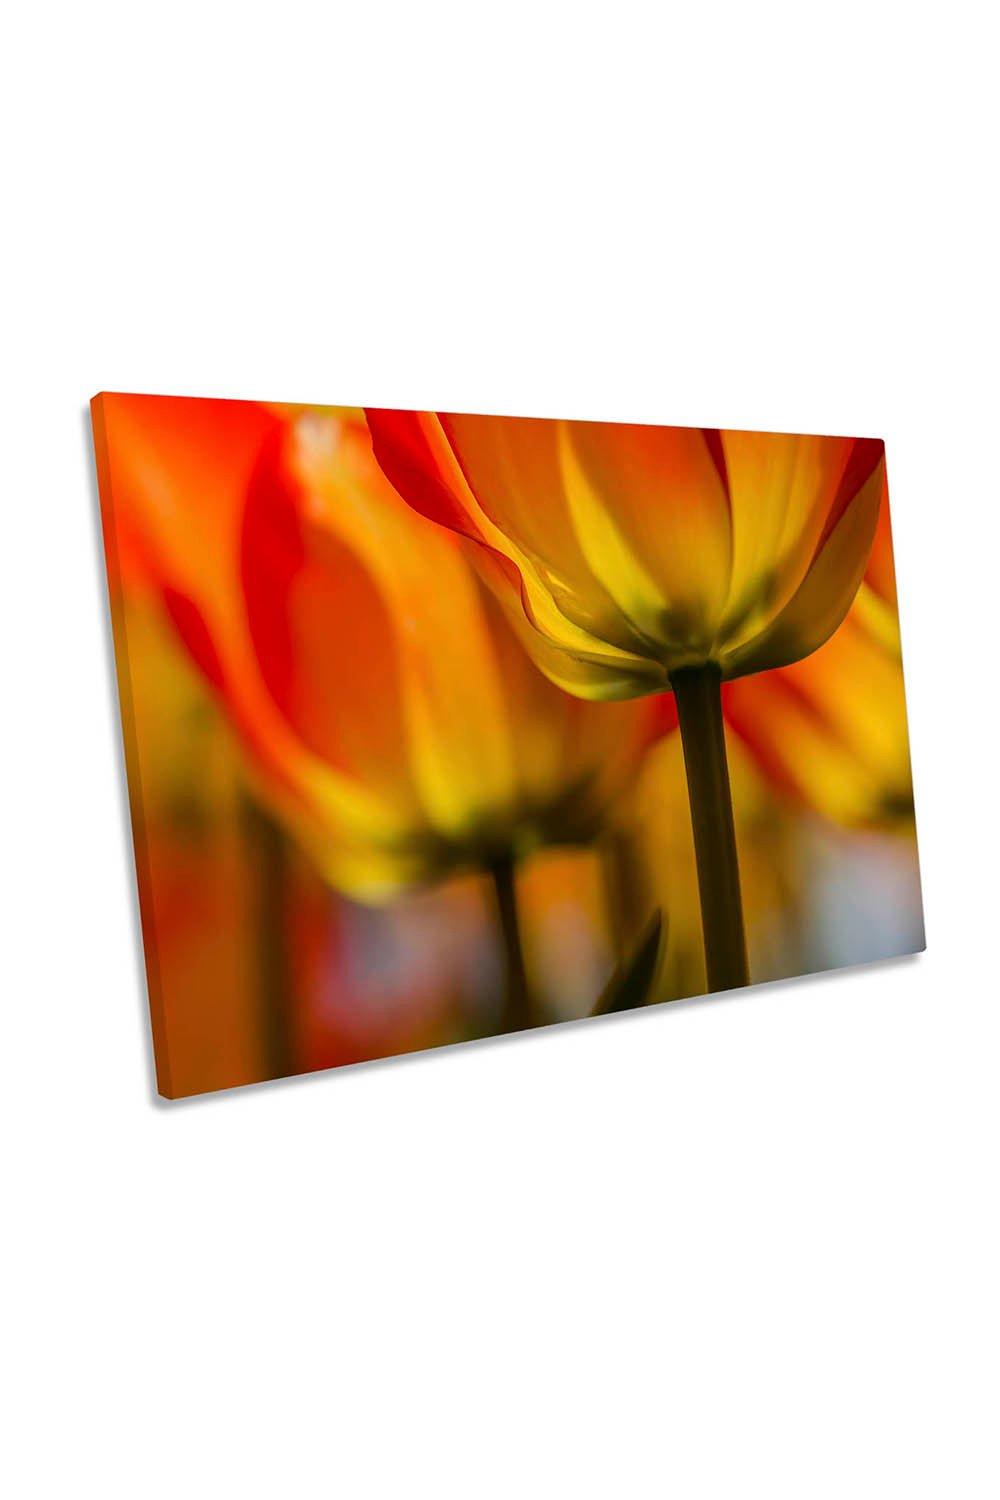 Under the Tulip Flower Floral Red and Yellow Canvas Wall Art Picture Print